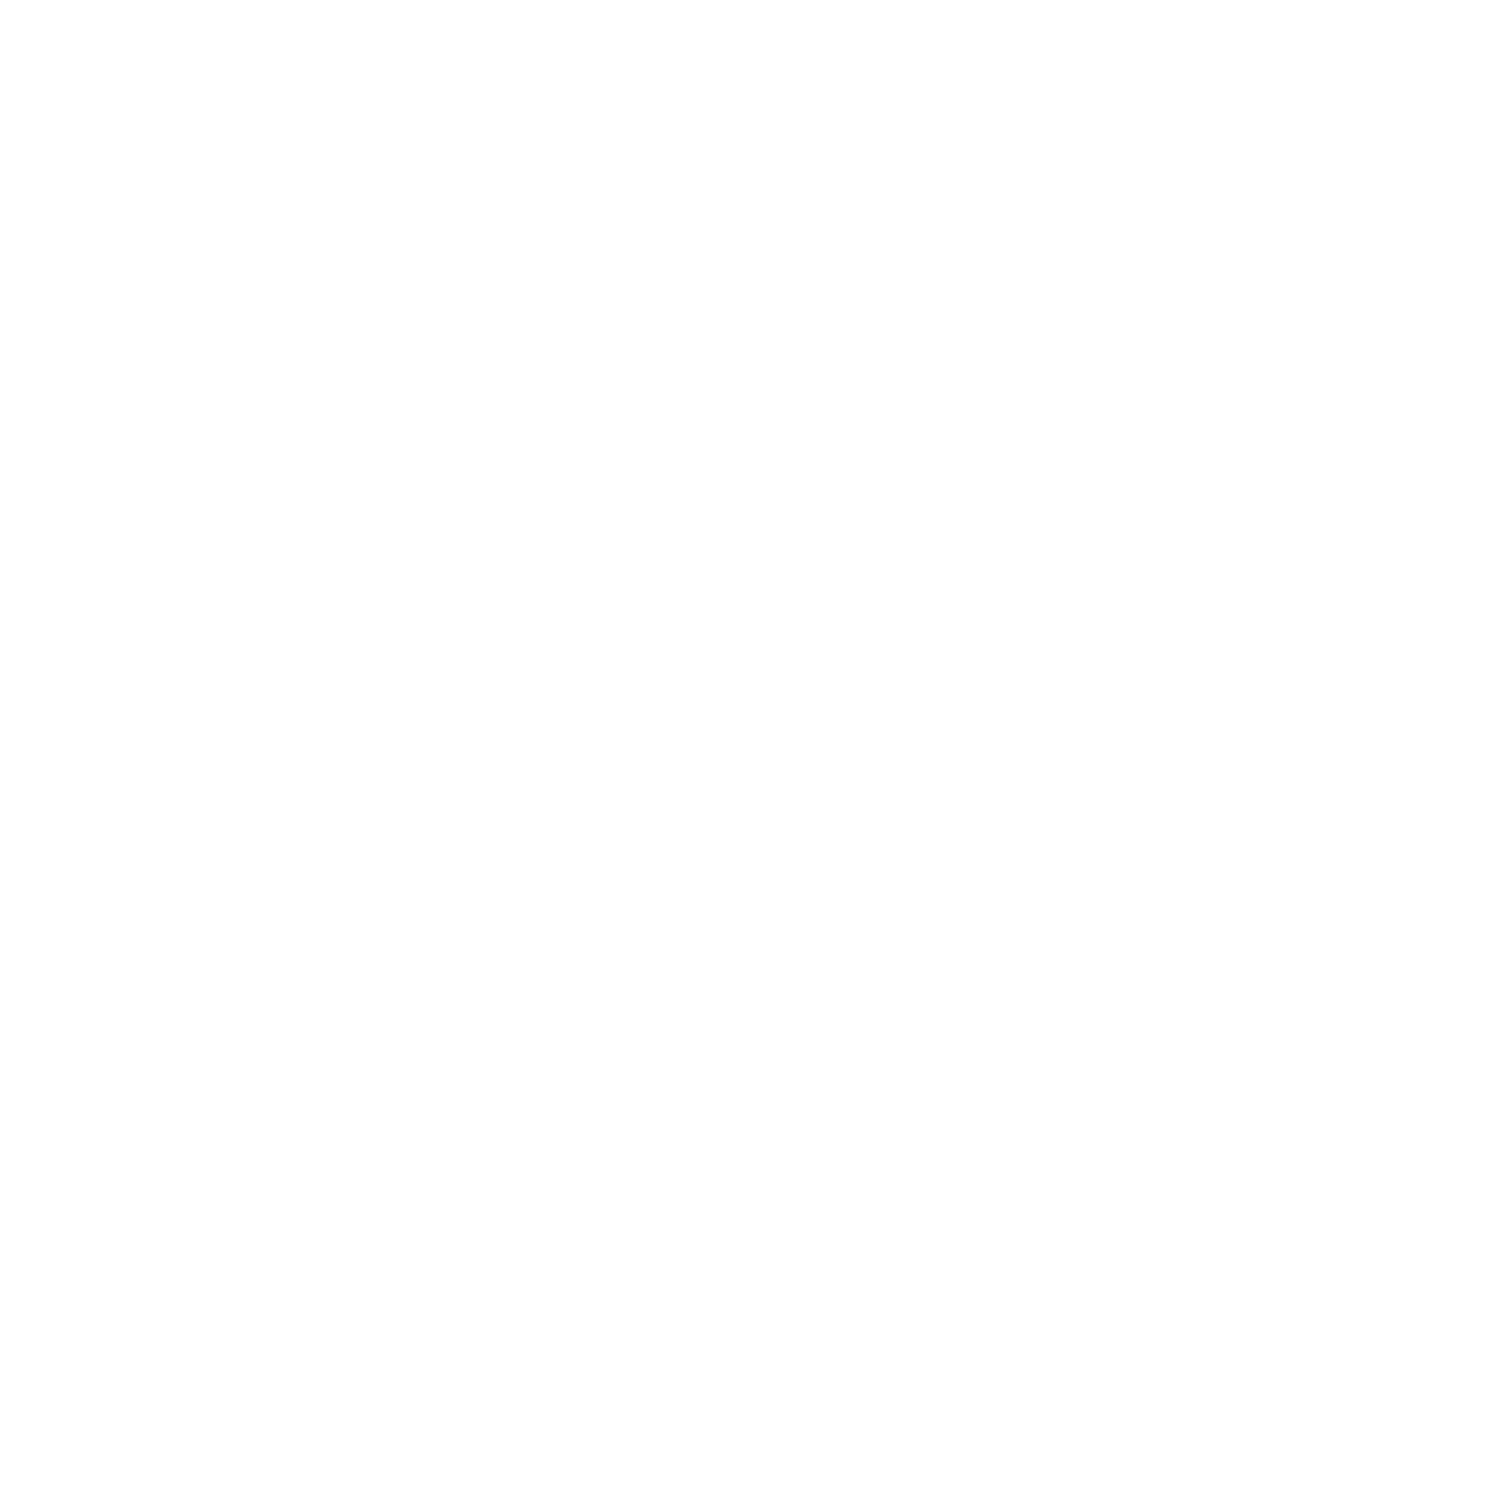 Macon Film Festival is an Independent and Immersive Film Festival in Georgia. August 19-22.